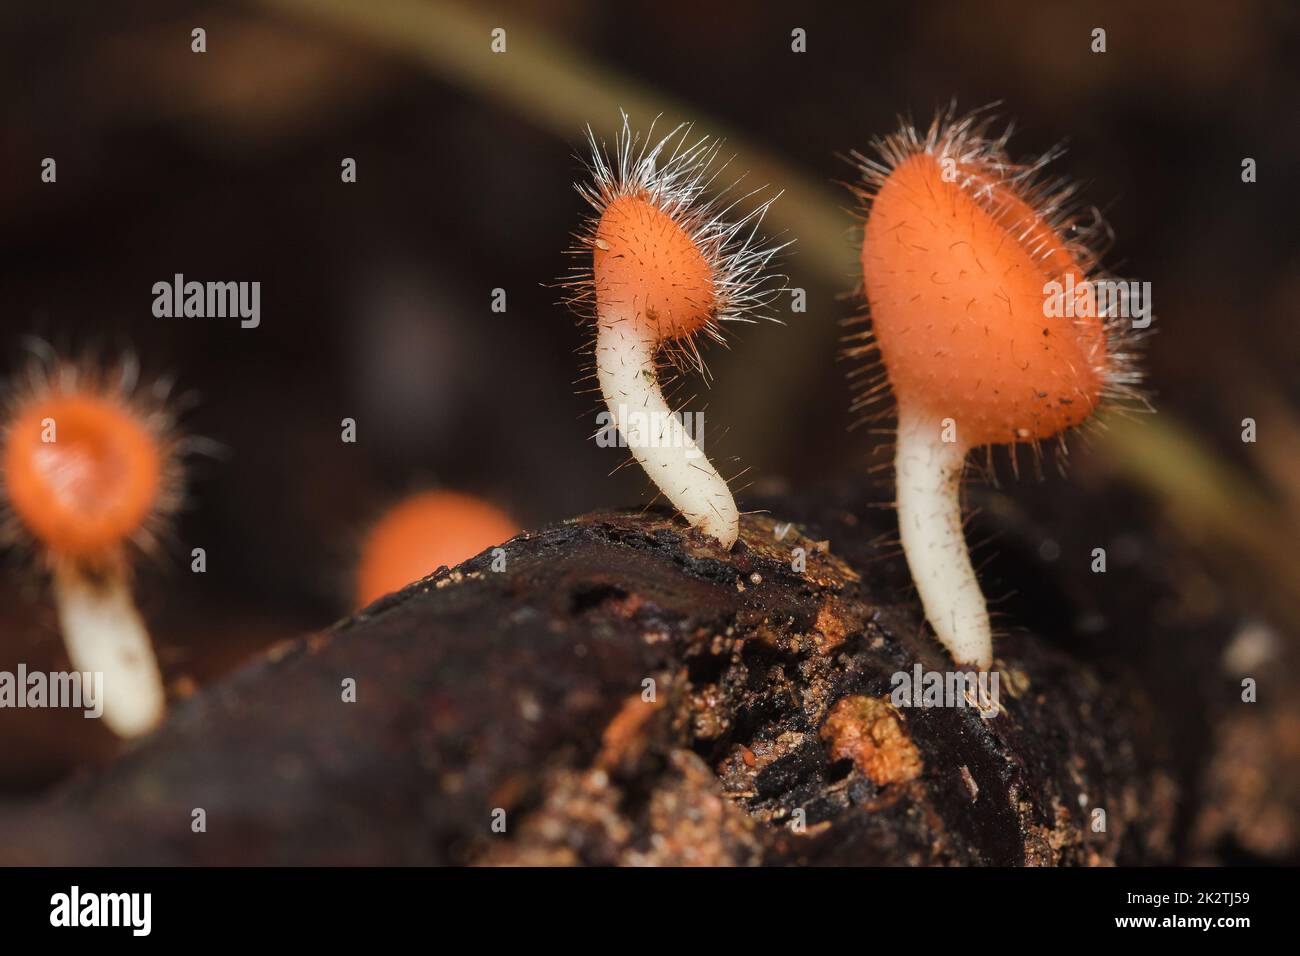 The Fungi Cup is orange, pink, red, found on the ground and dead timber. Stock Photo